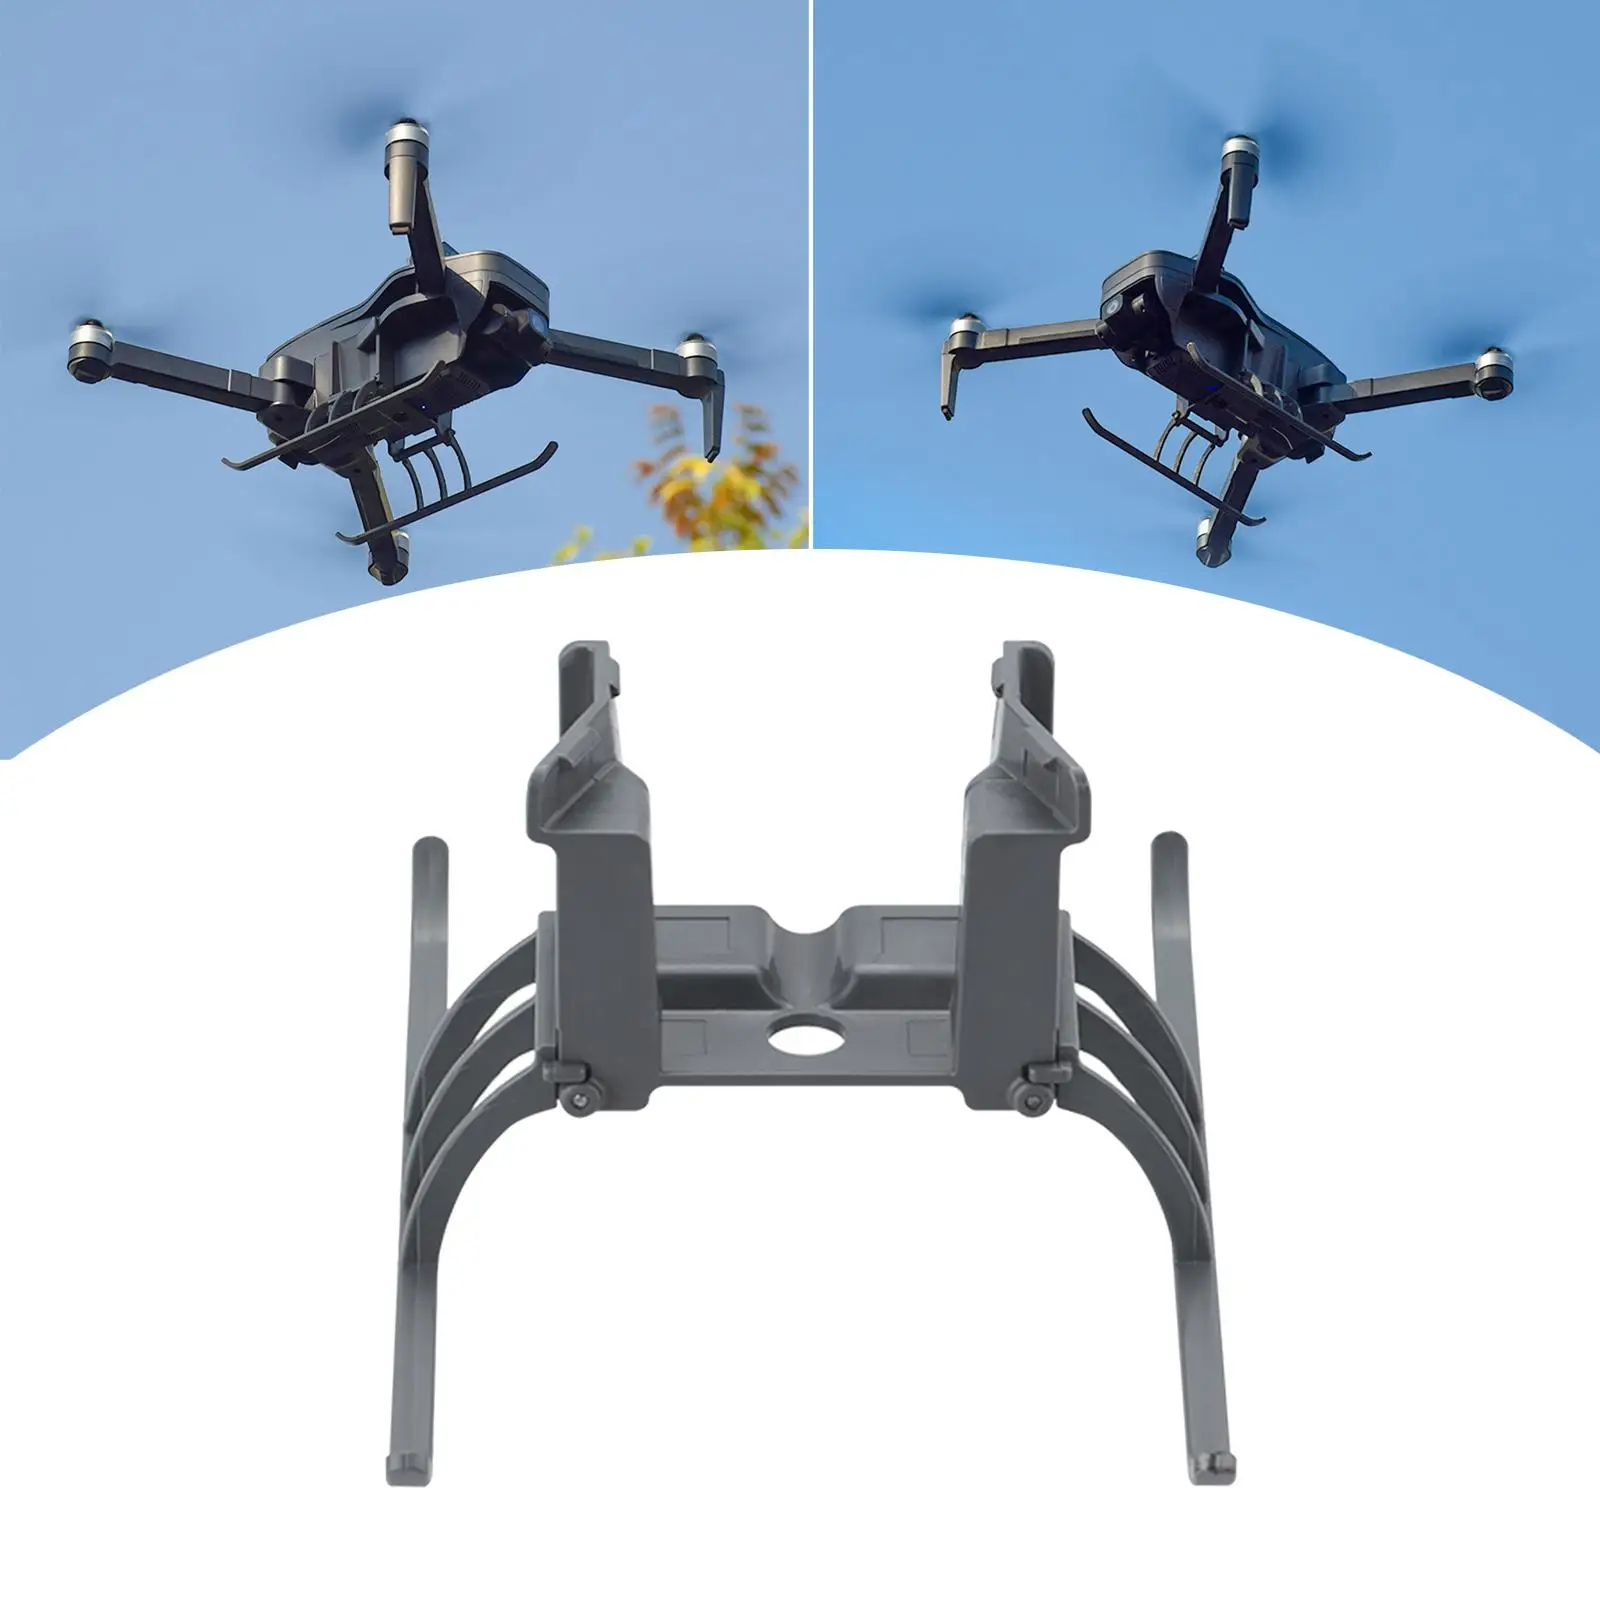 Drone Folding Height Extension Landing Feet Gimbal Protector for SG906Max, Light Weight 26.1G Net Weight Durable Accessories